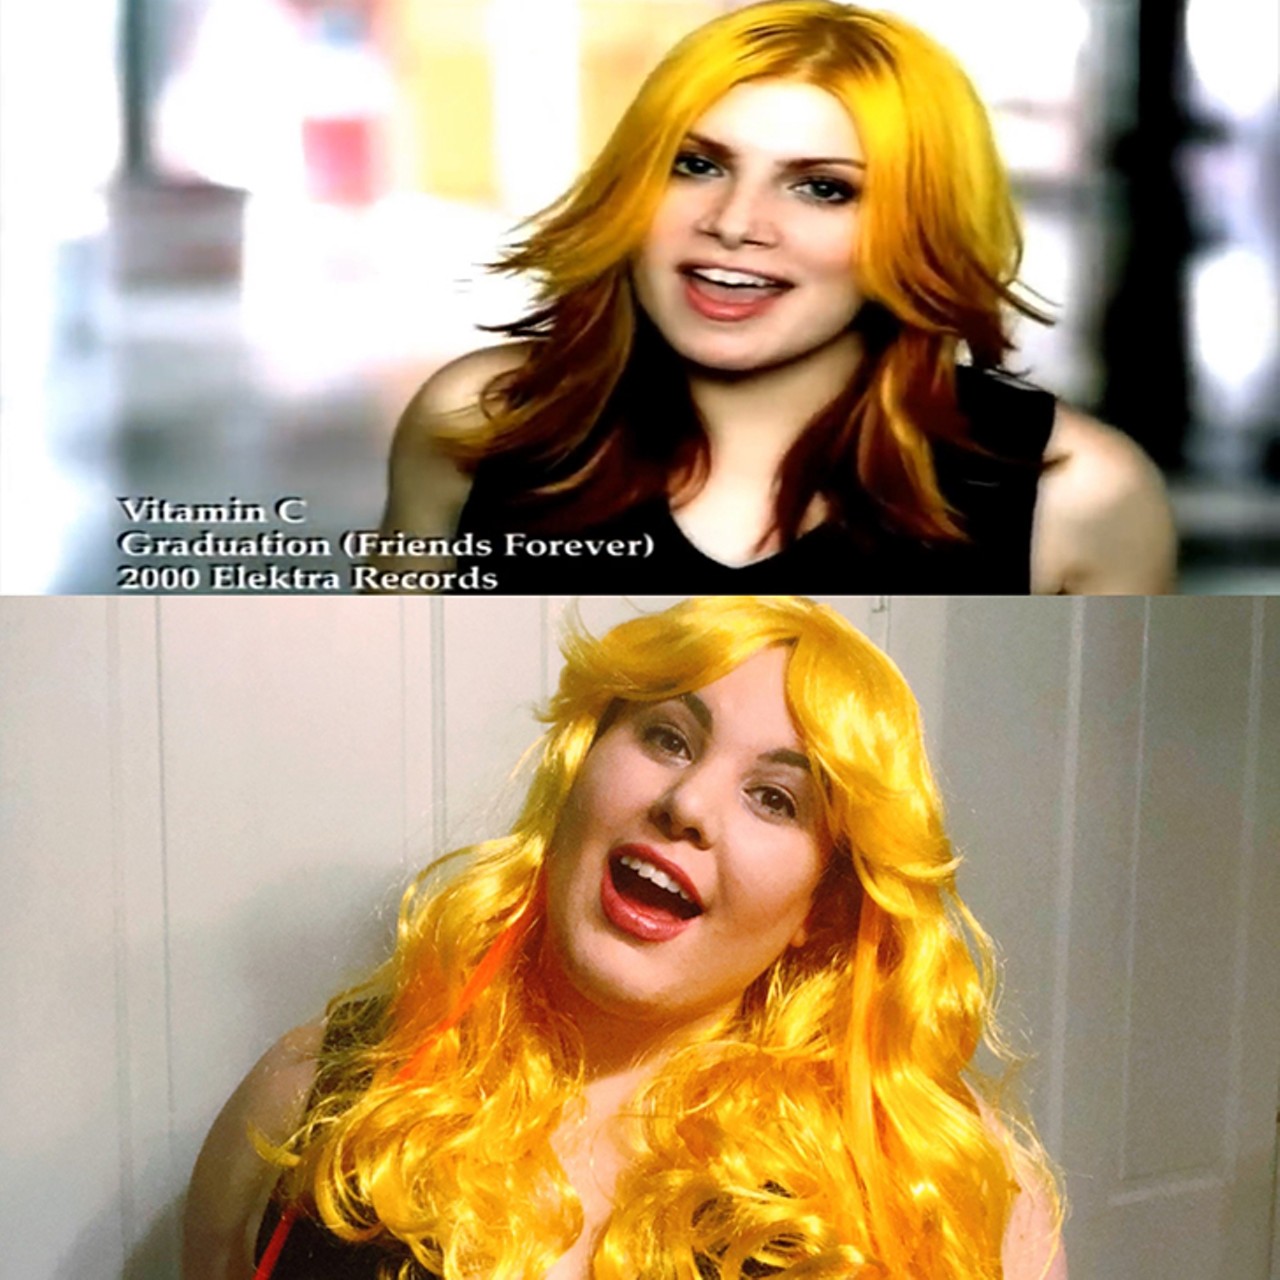 Vitamin C from the Graduation (Friends Forever) music video